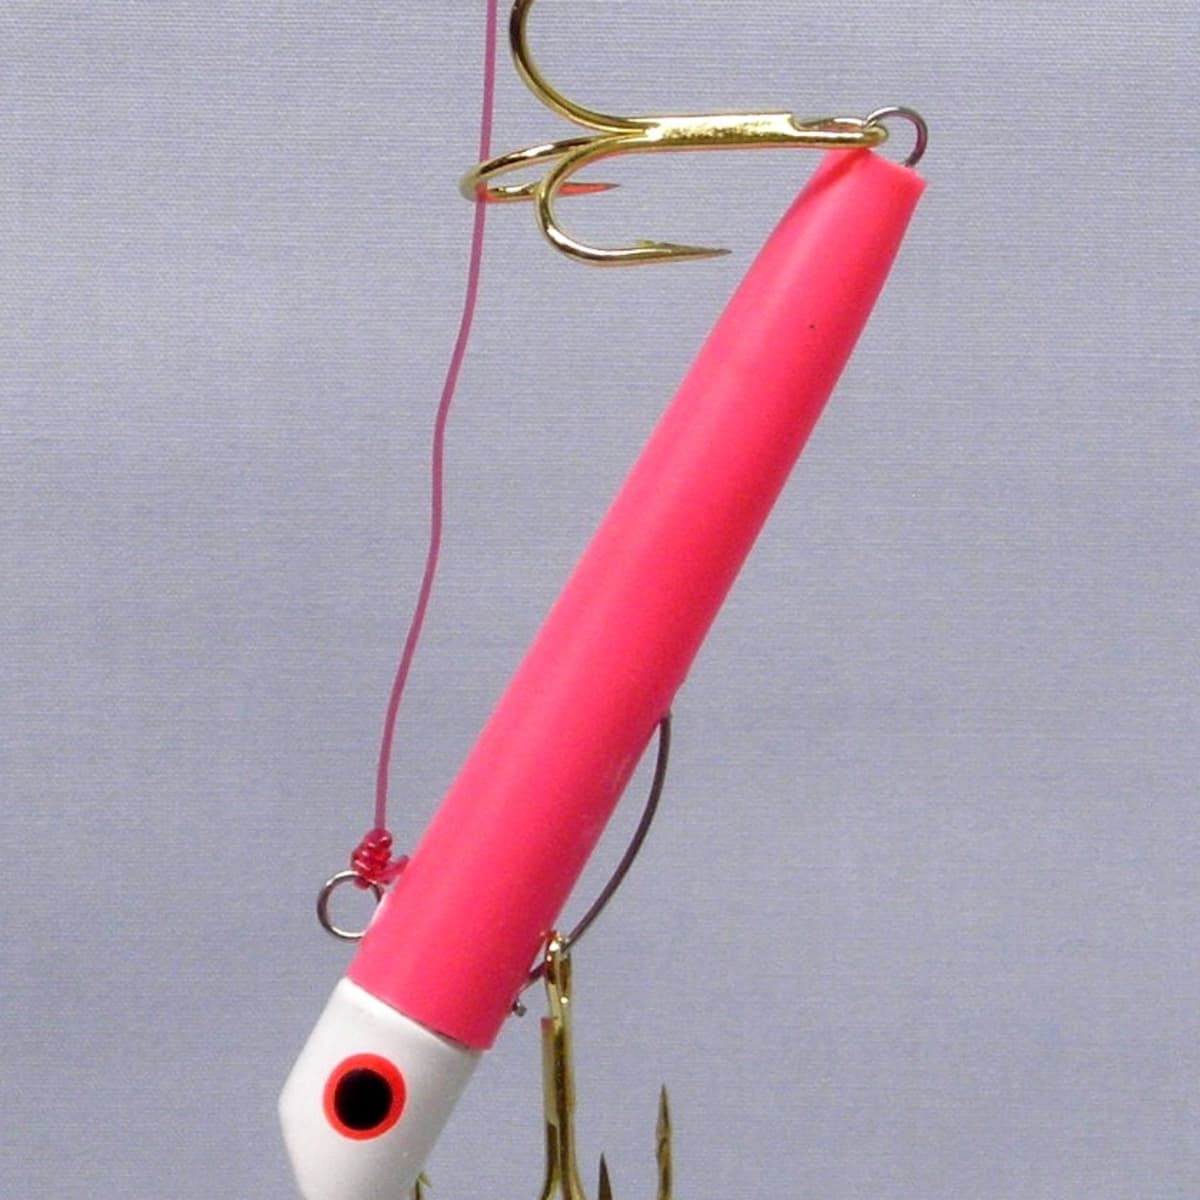 Modifying the Gotcha Jerk Jig to Avoid Fouling - HubPages